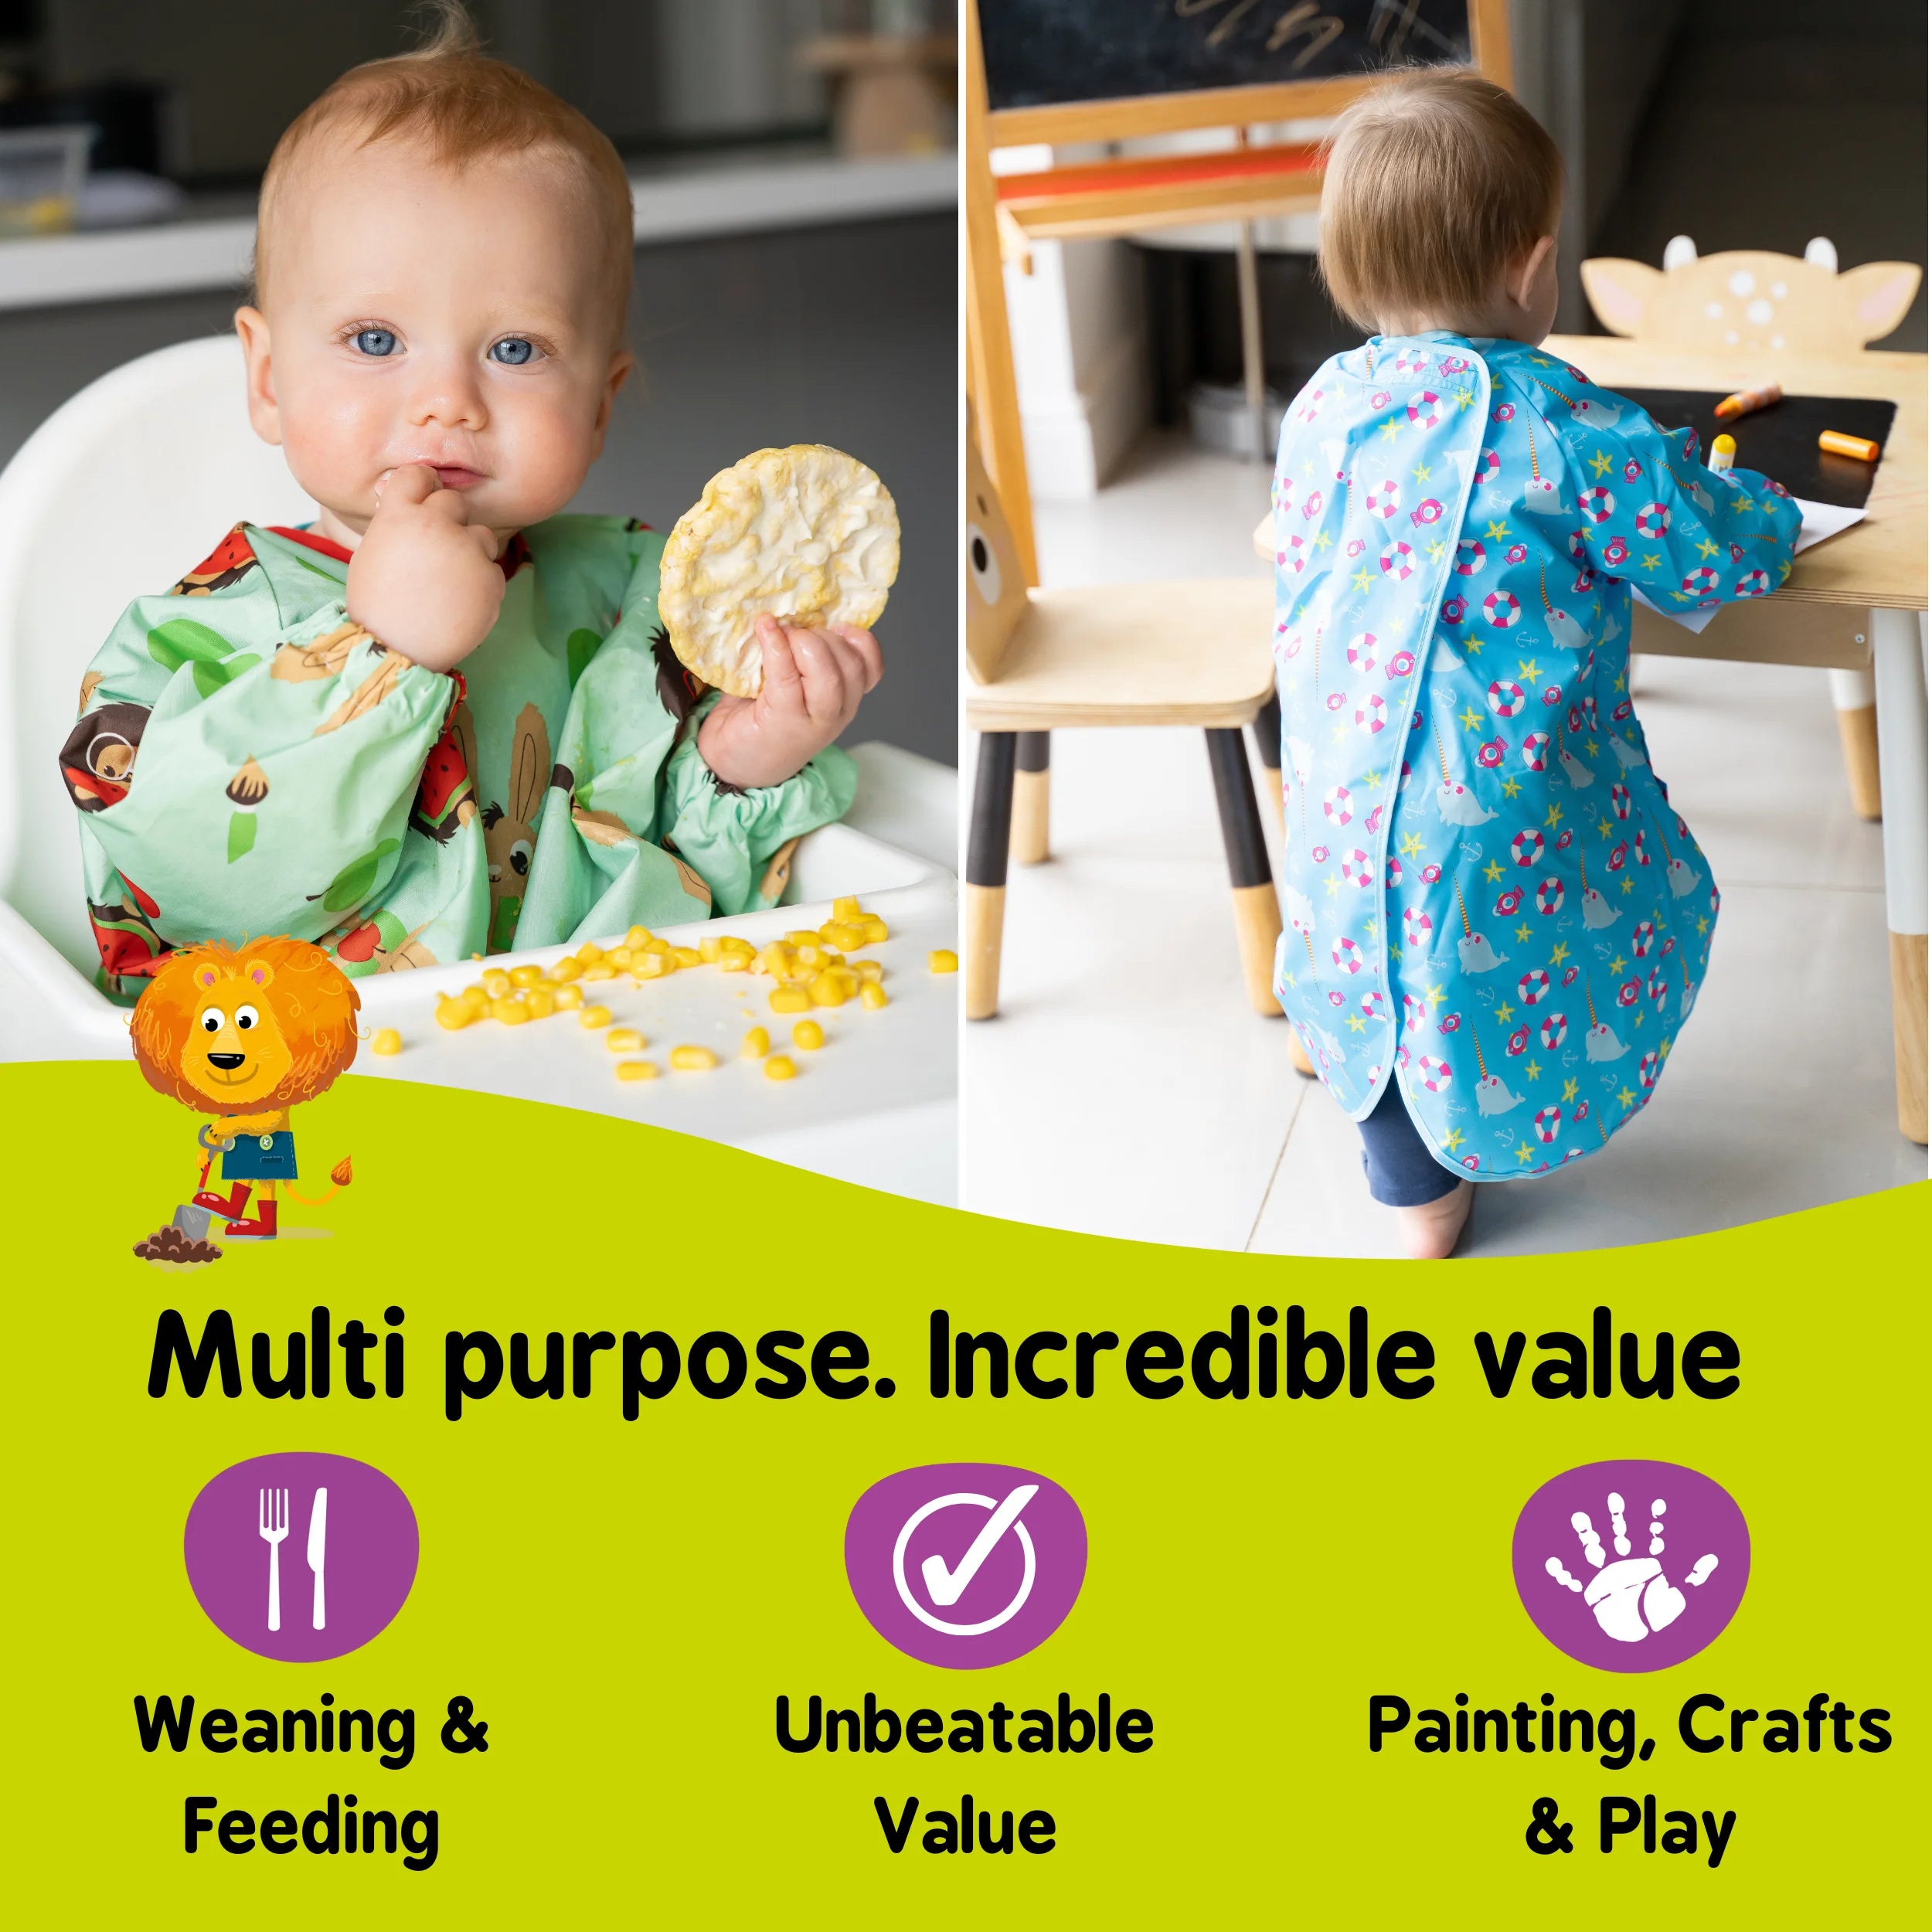 Tidy Tot Bib & Tray Kit – Coverall Food Catcher bib with Sleeves attaches  to highchair Tray. Baby Weaning Bib Ideal for Baby led weaning and Messy  Play – BigaMart